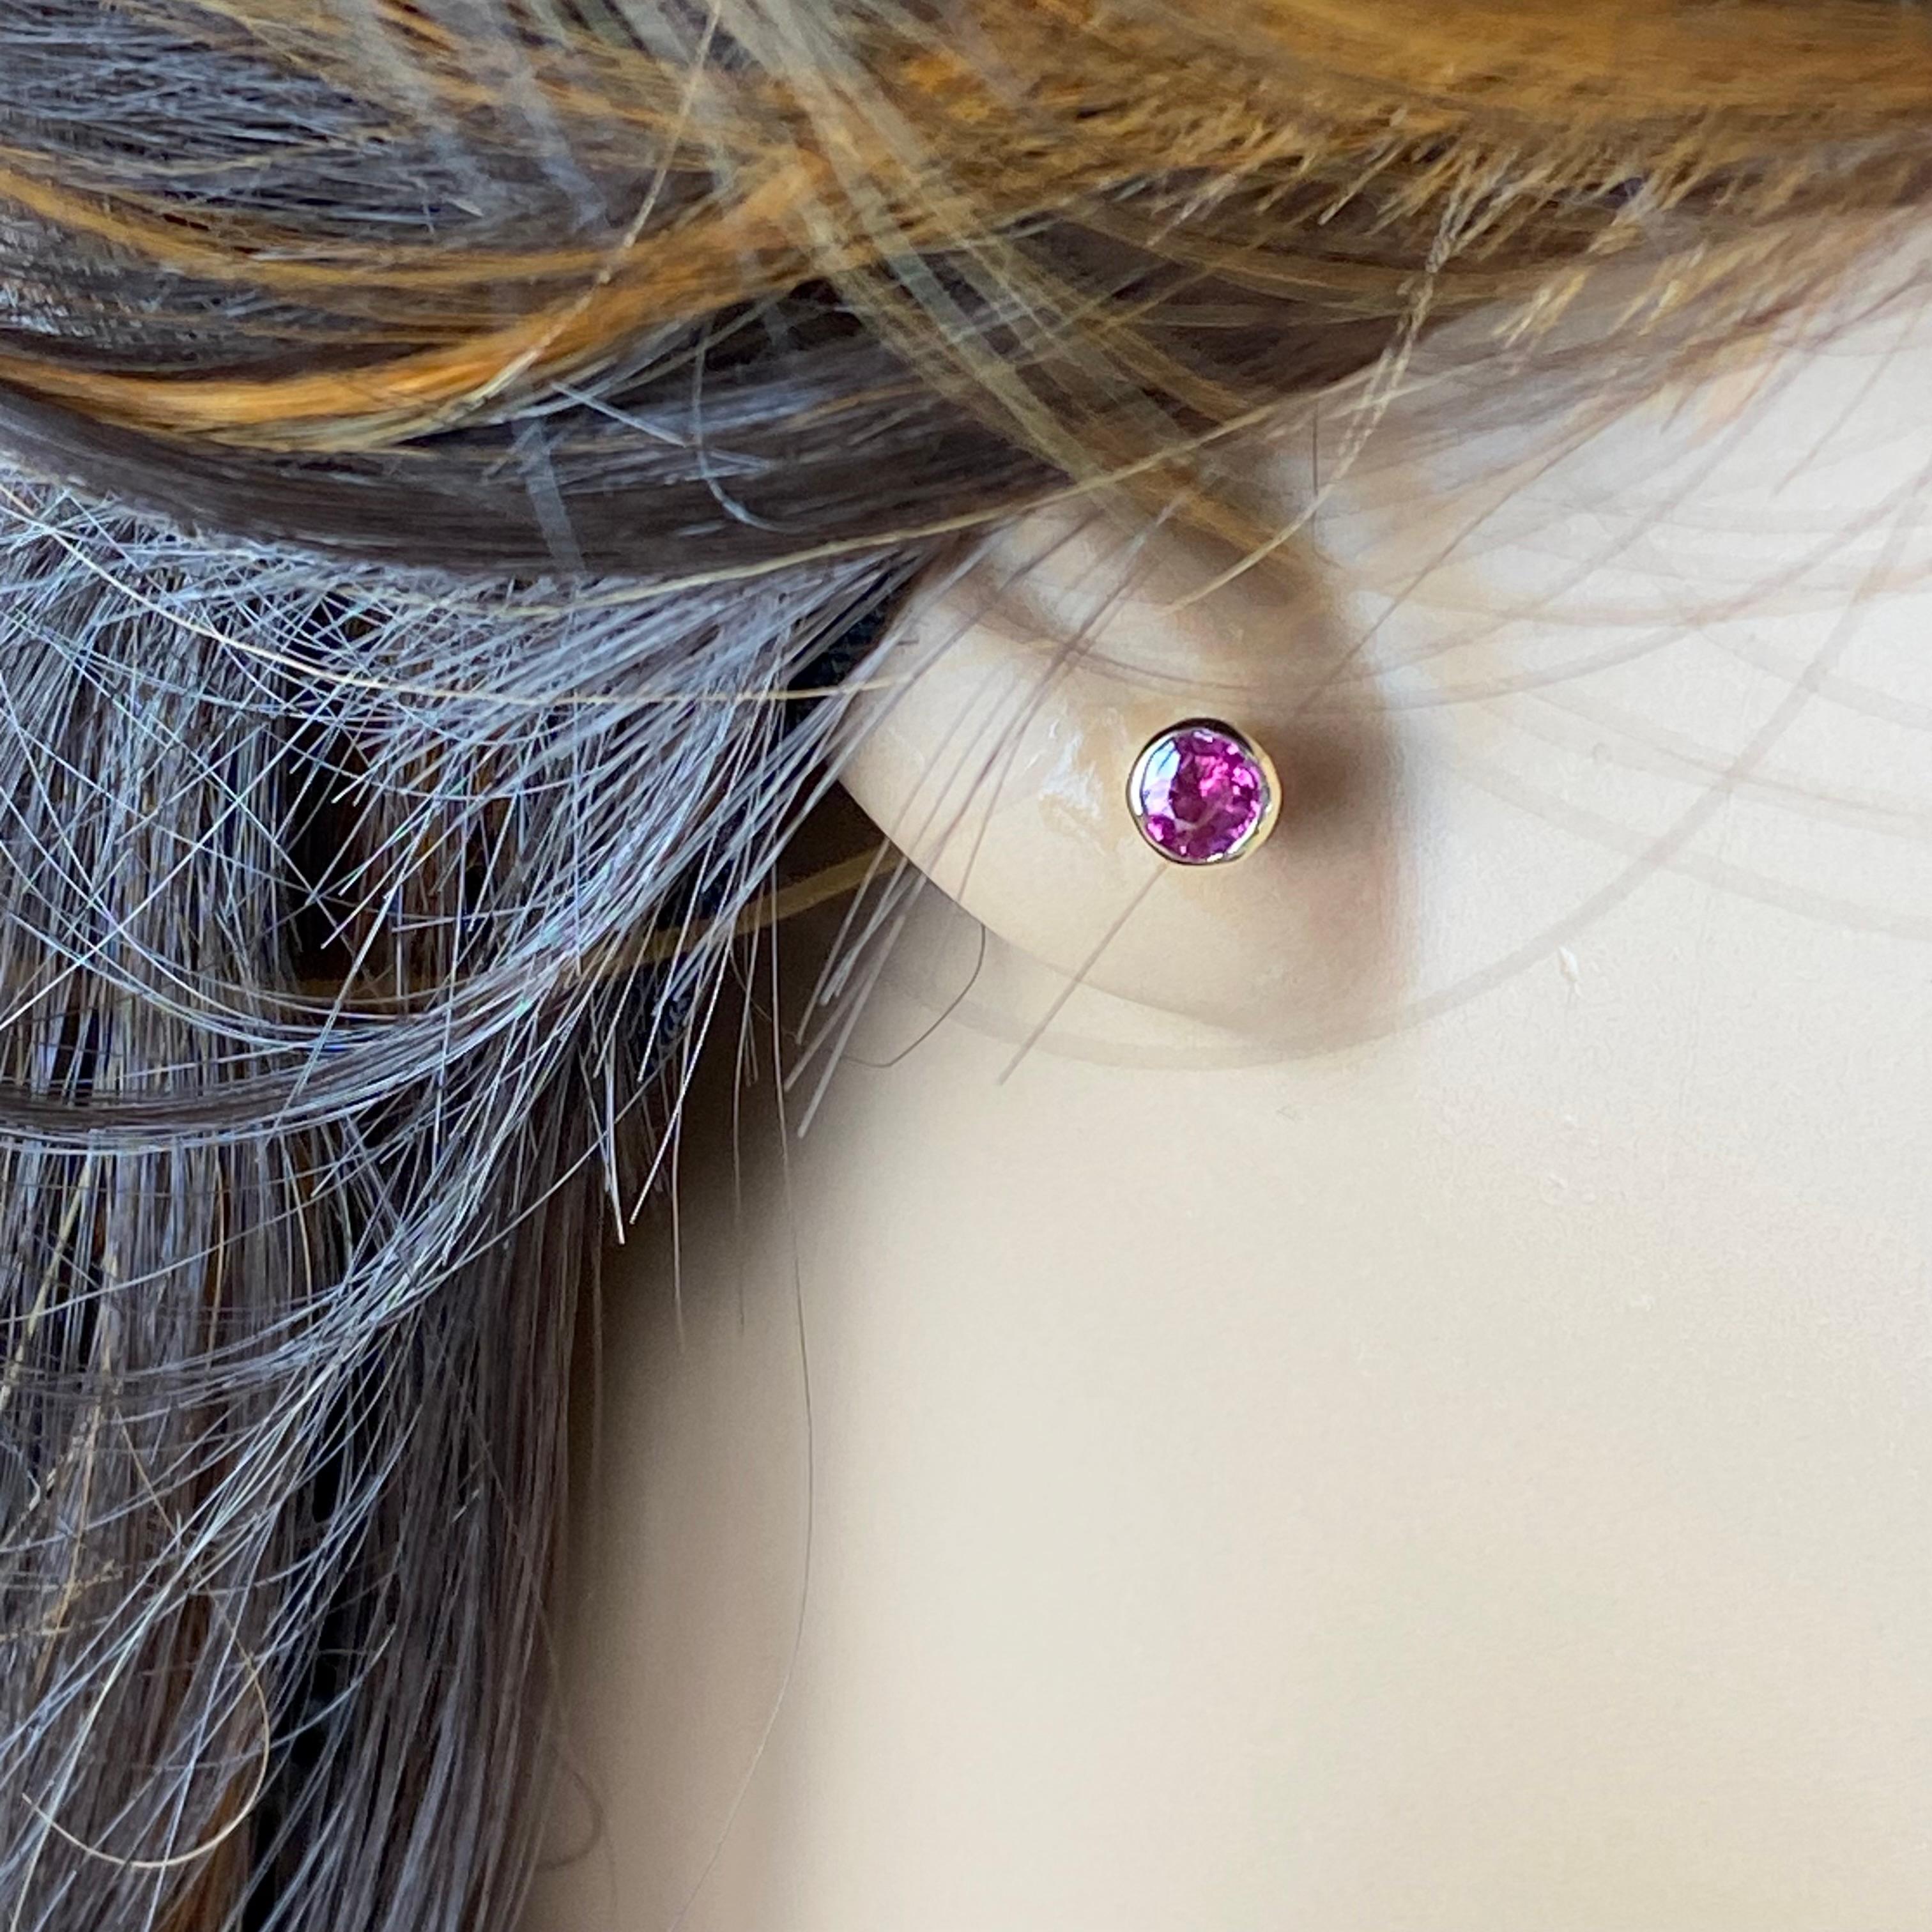 Introducing our Pair Round Burma Ruby 0.40 Carat Bezel Set 14 Karat Yellow Gold 0.15 Inch Stud Earrings – a timeless and elegant addition to your jewelry collection.
Experience the allure of natural beauty and exquisite craftsmanship with our Pair